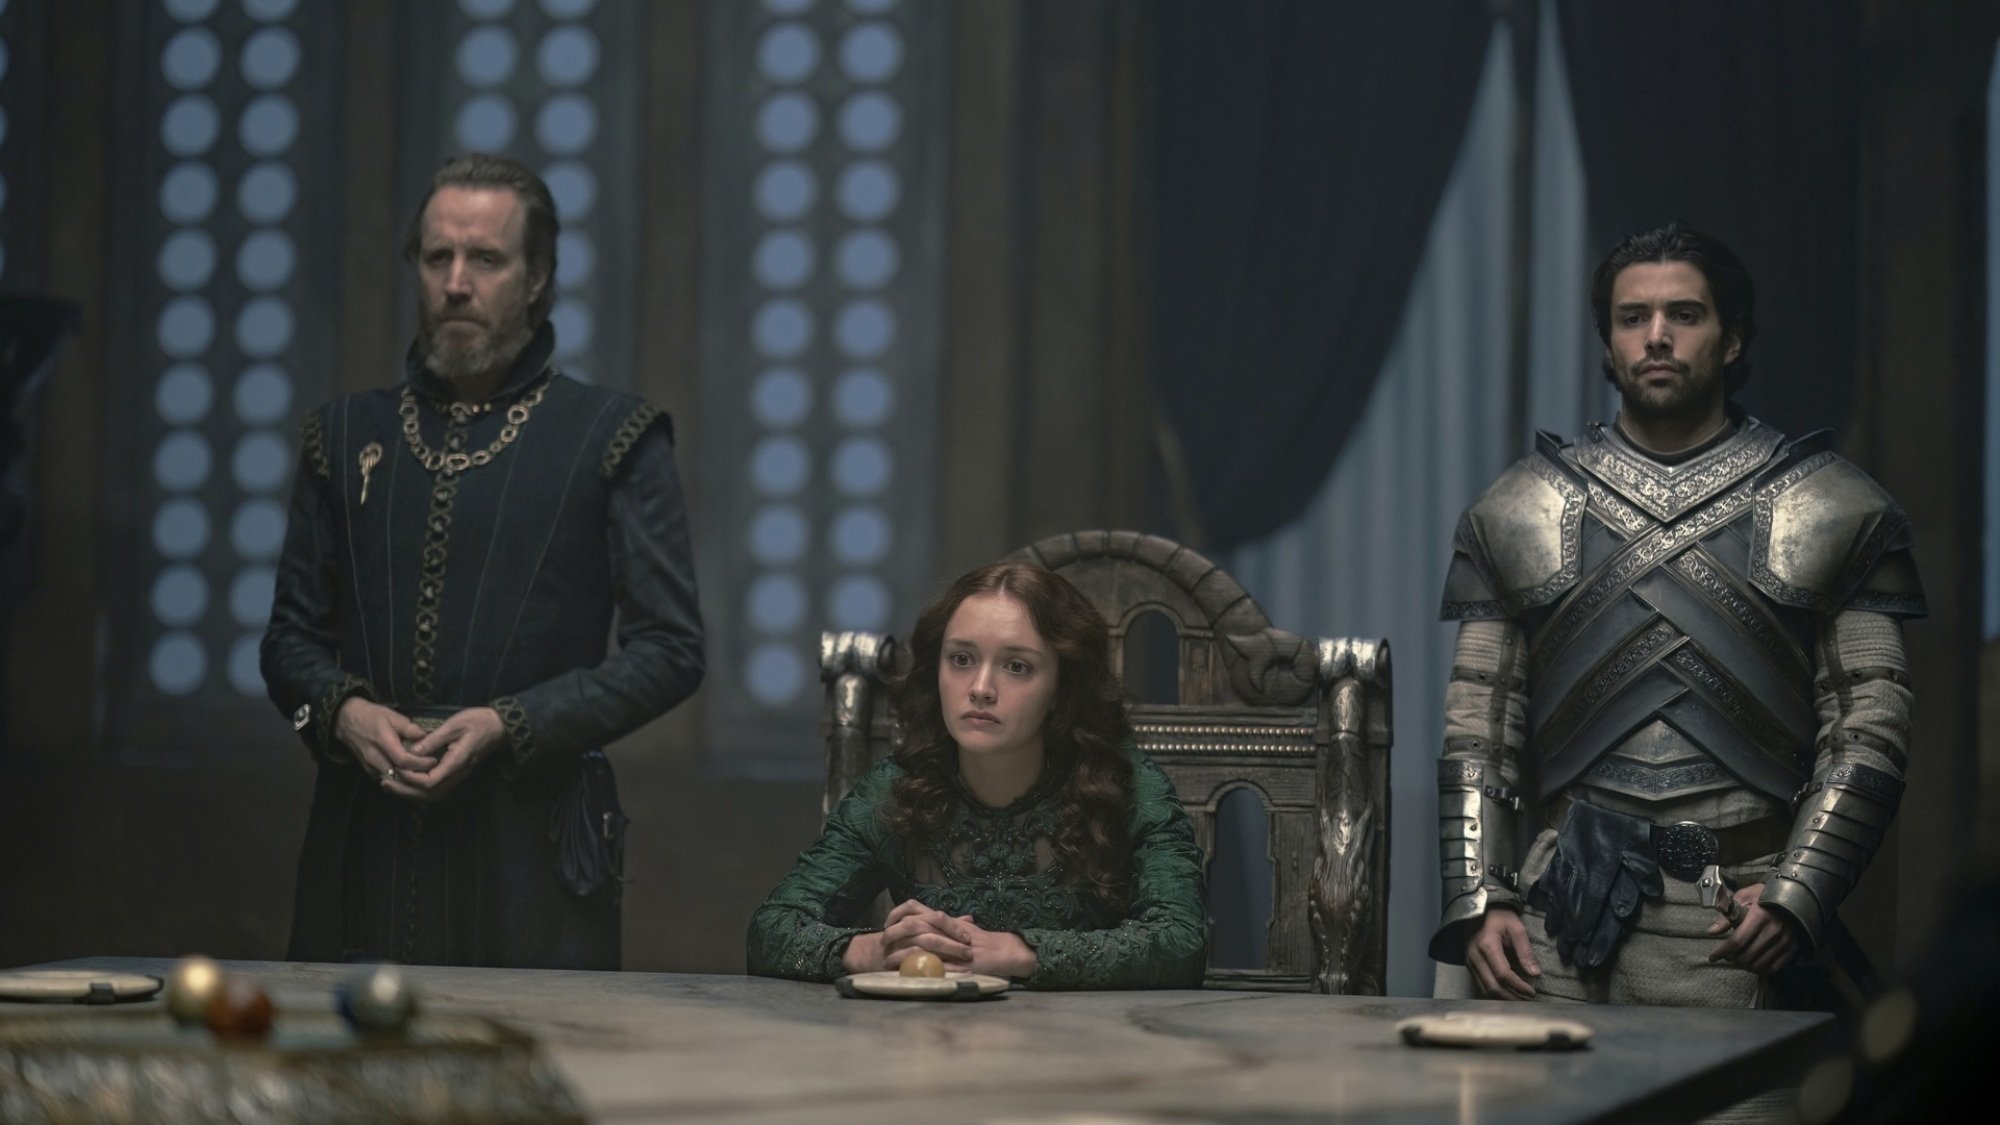 A woman in a green dress sits at the head of a large table. A man in knight's armor stands on one side of her, and a man in black clothing with a bronze hand pin stands on the other side.